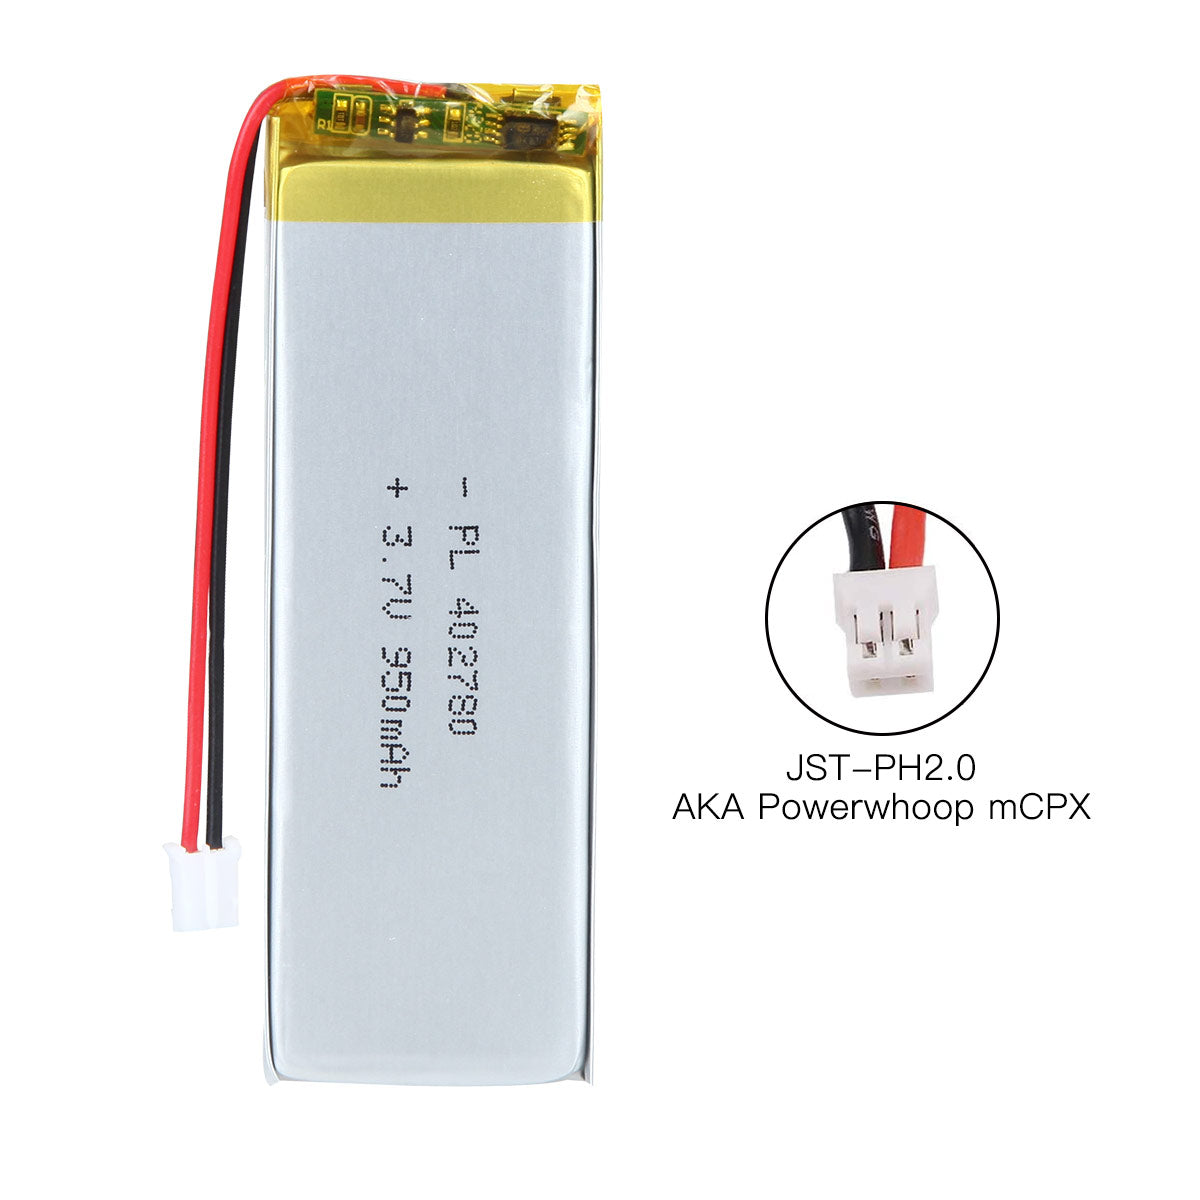 YDL 3.7V 950mAh 402780 Rechargeable Polymer Lithium-Ion Battery Length 82mm